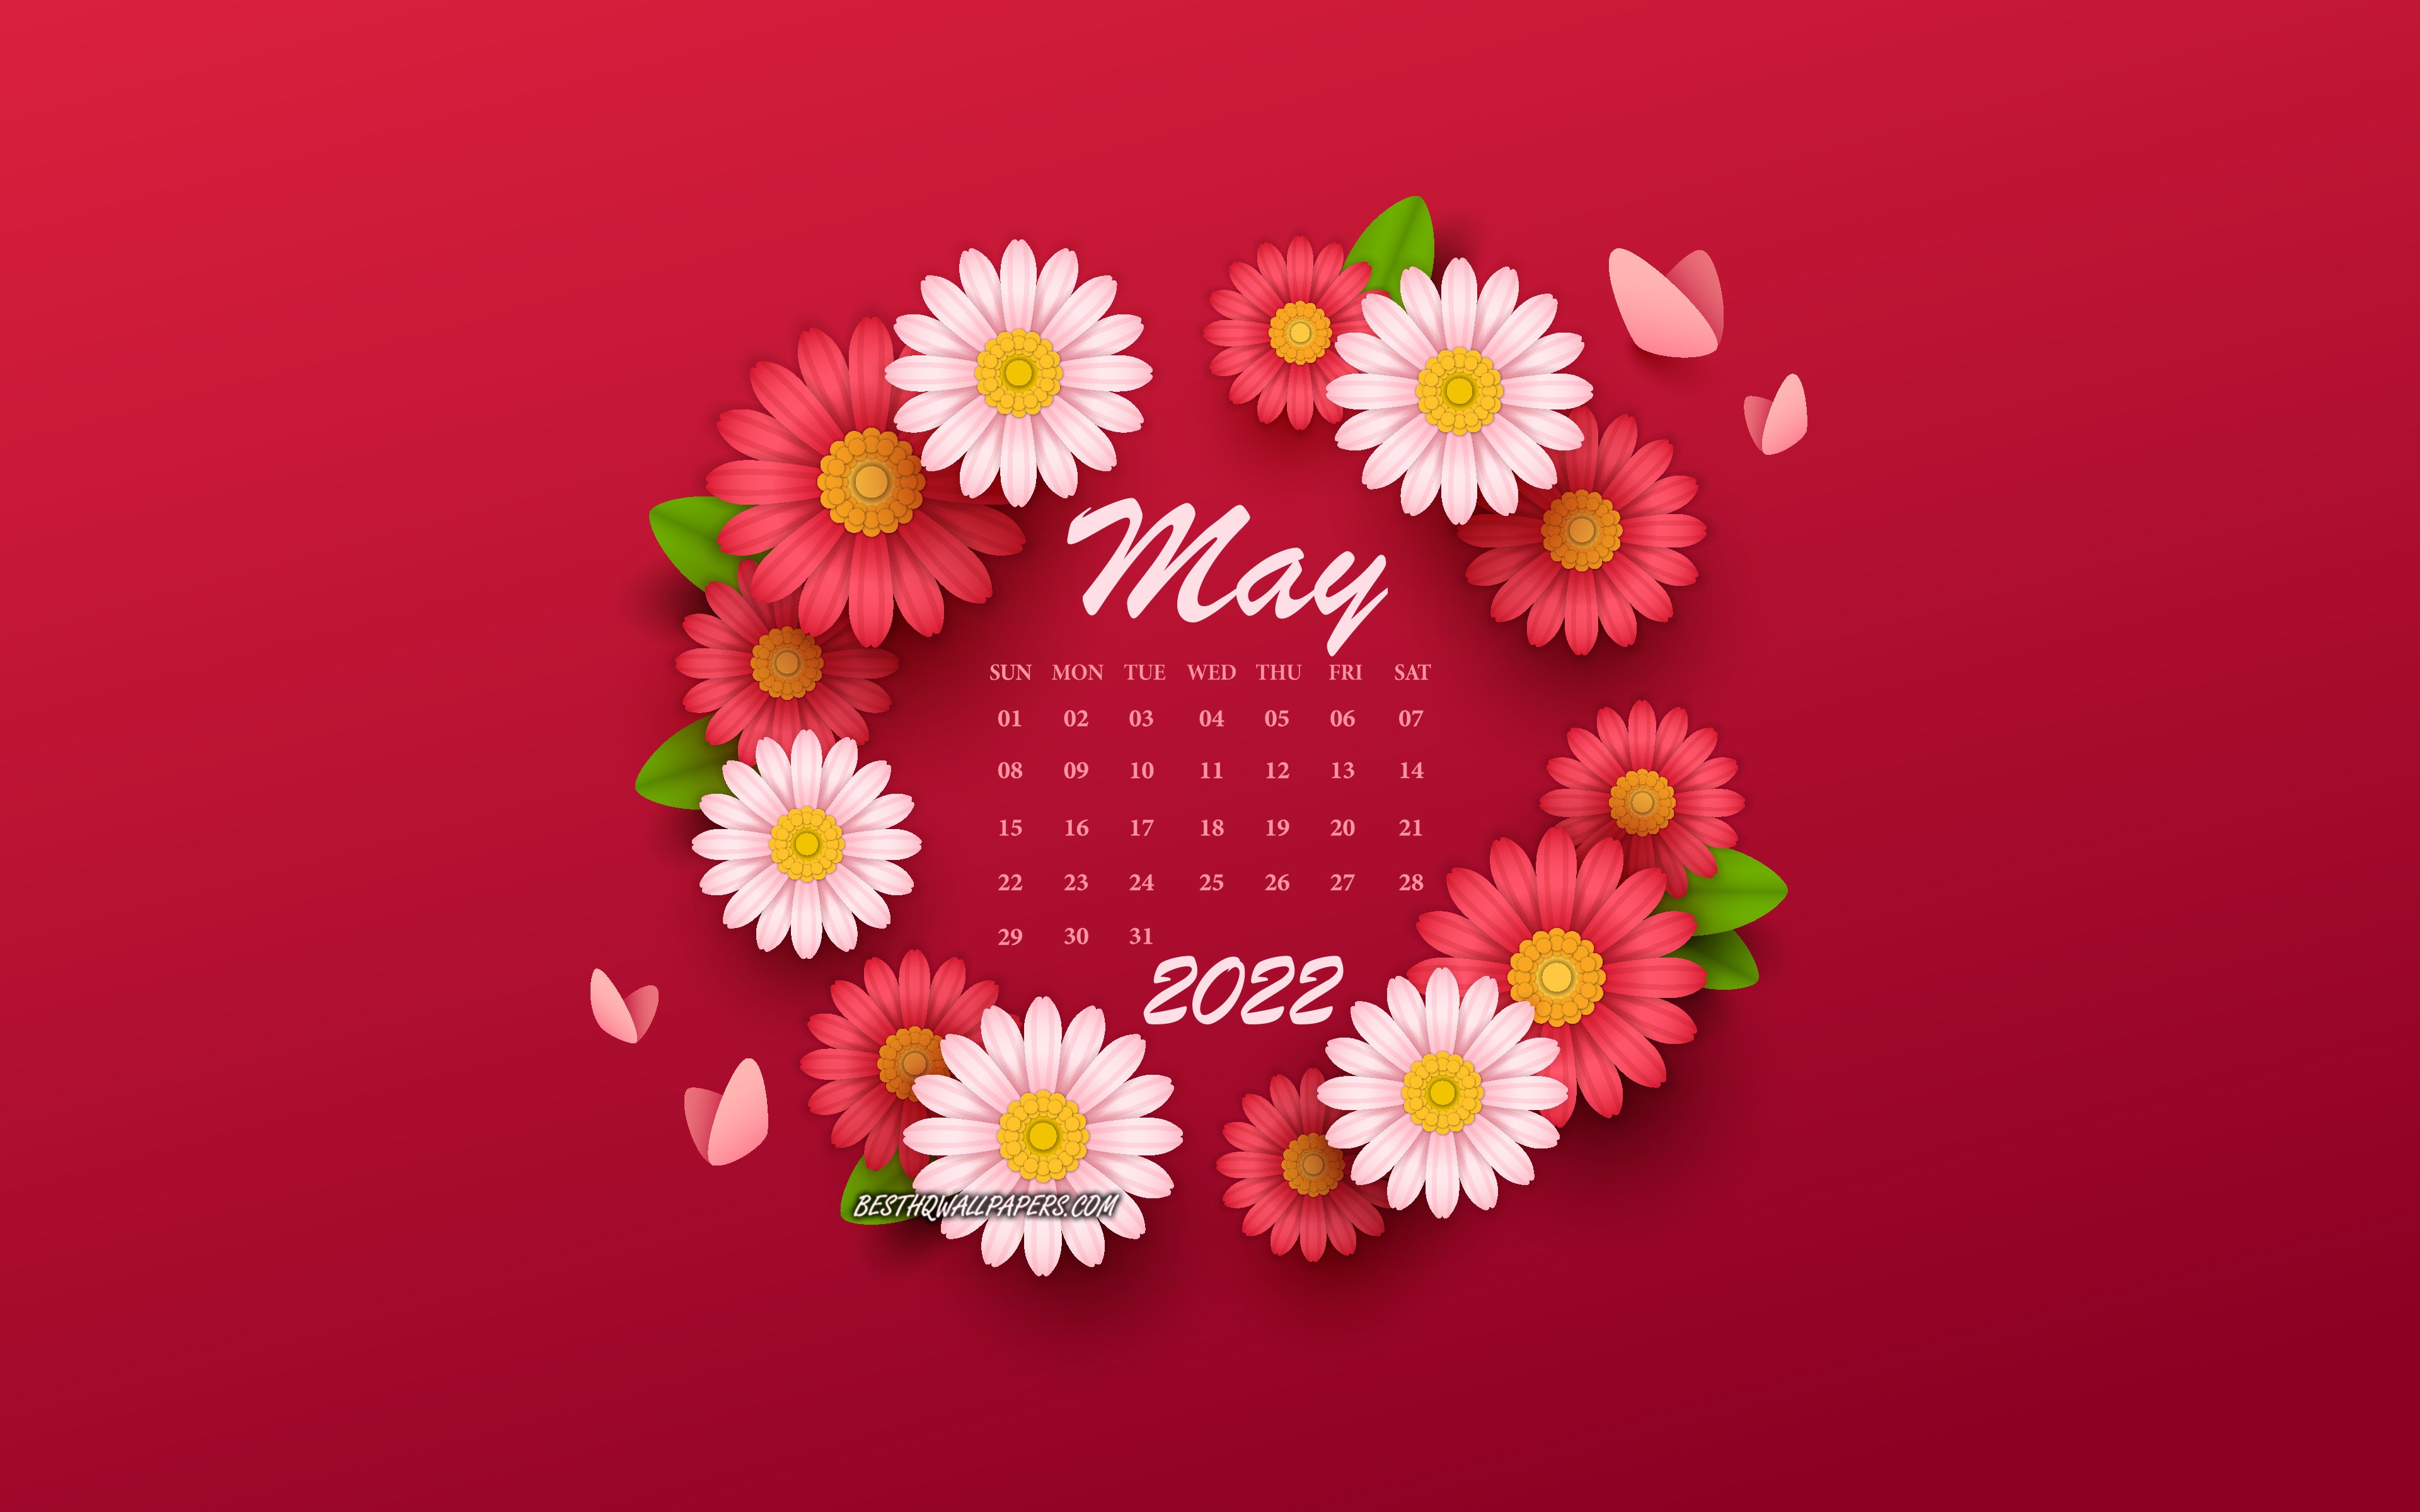 Download wallpapers 2022 May Calendar, 4k, background with flowers